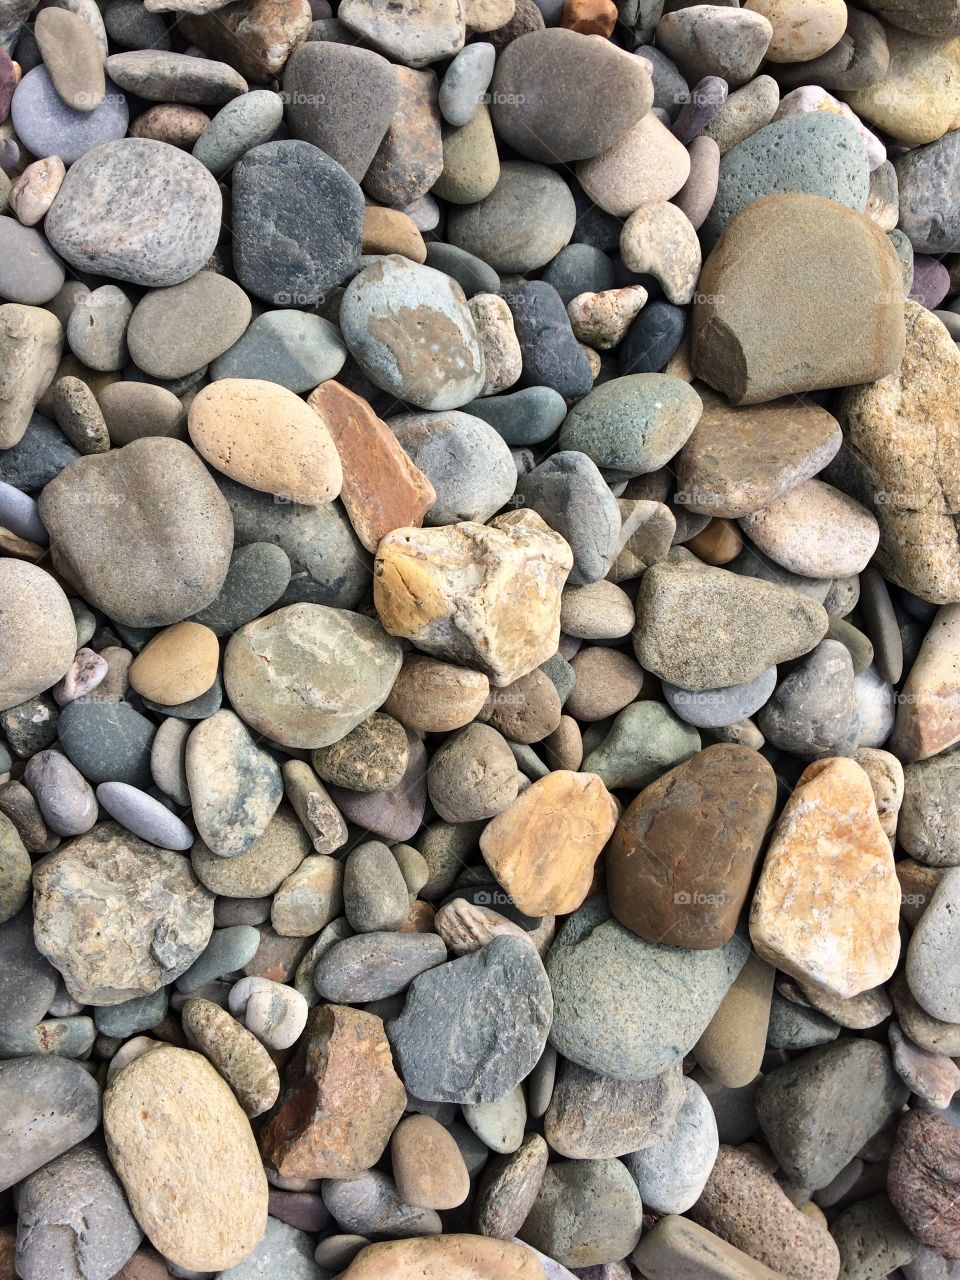 Beach-rolled stones and pebbles